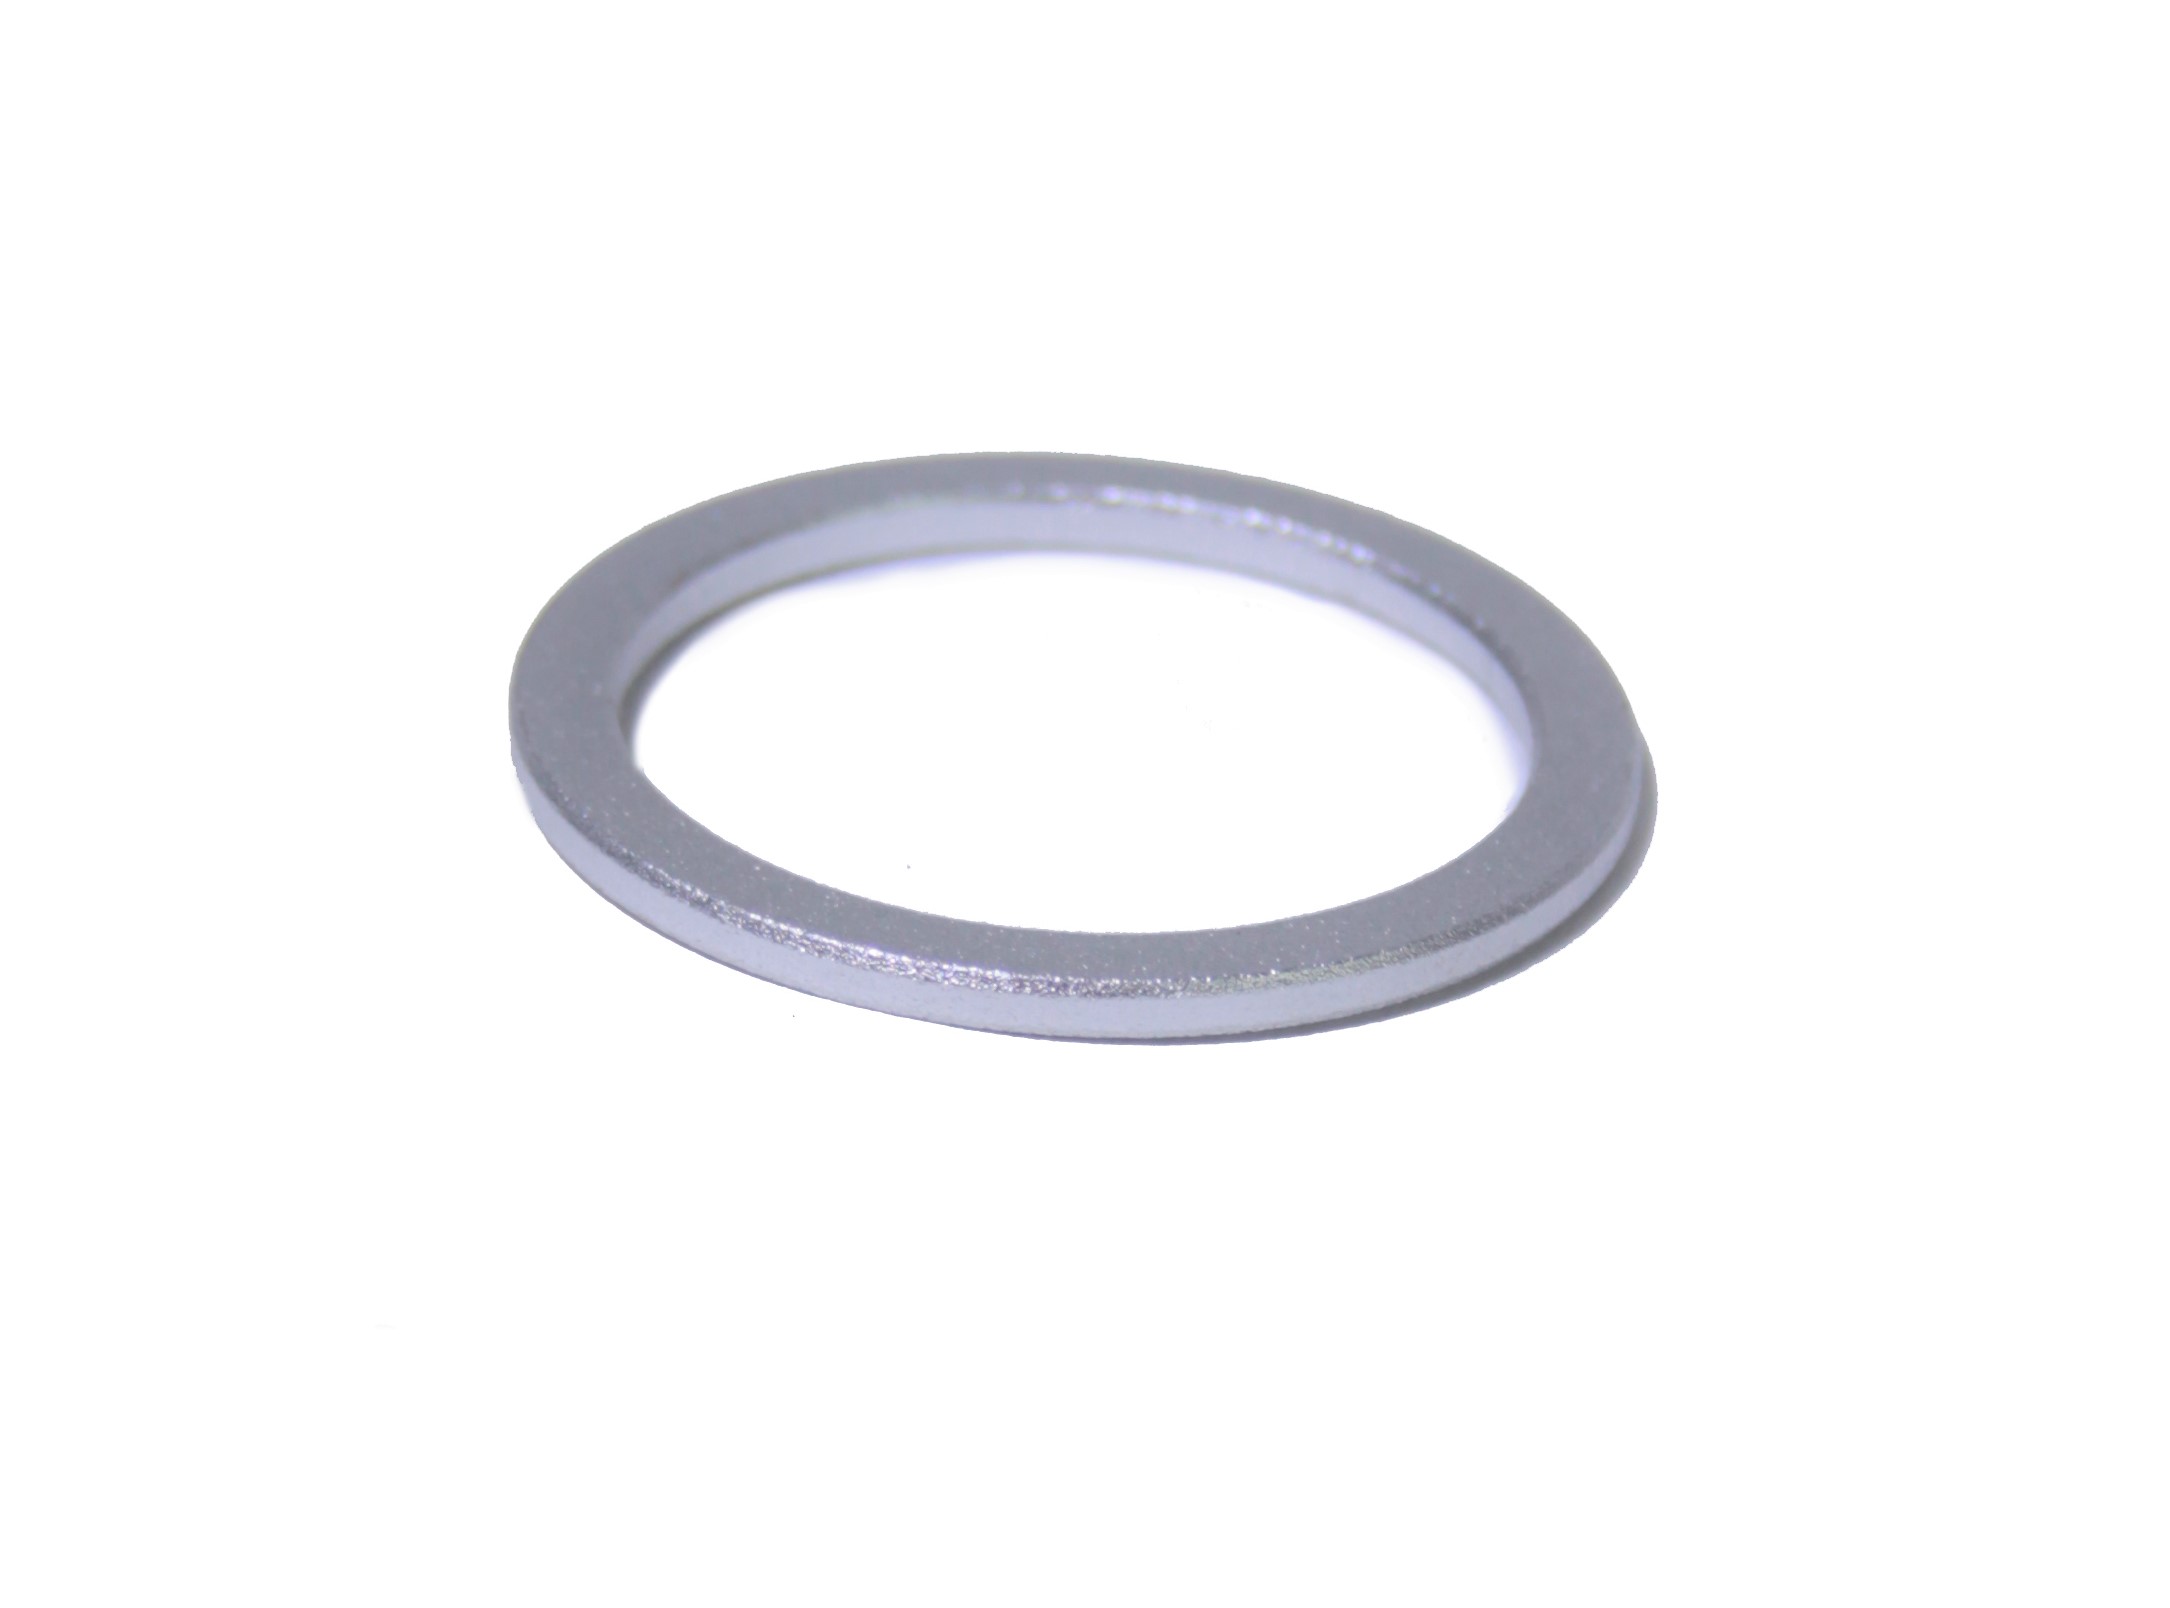 Spacer 2 mm 1 1/8 x 2 mm, alu silver